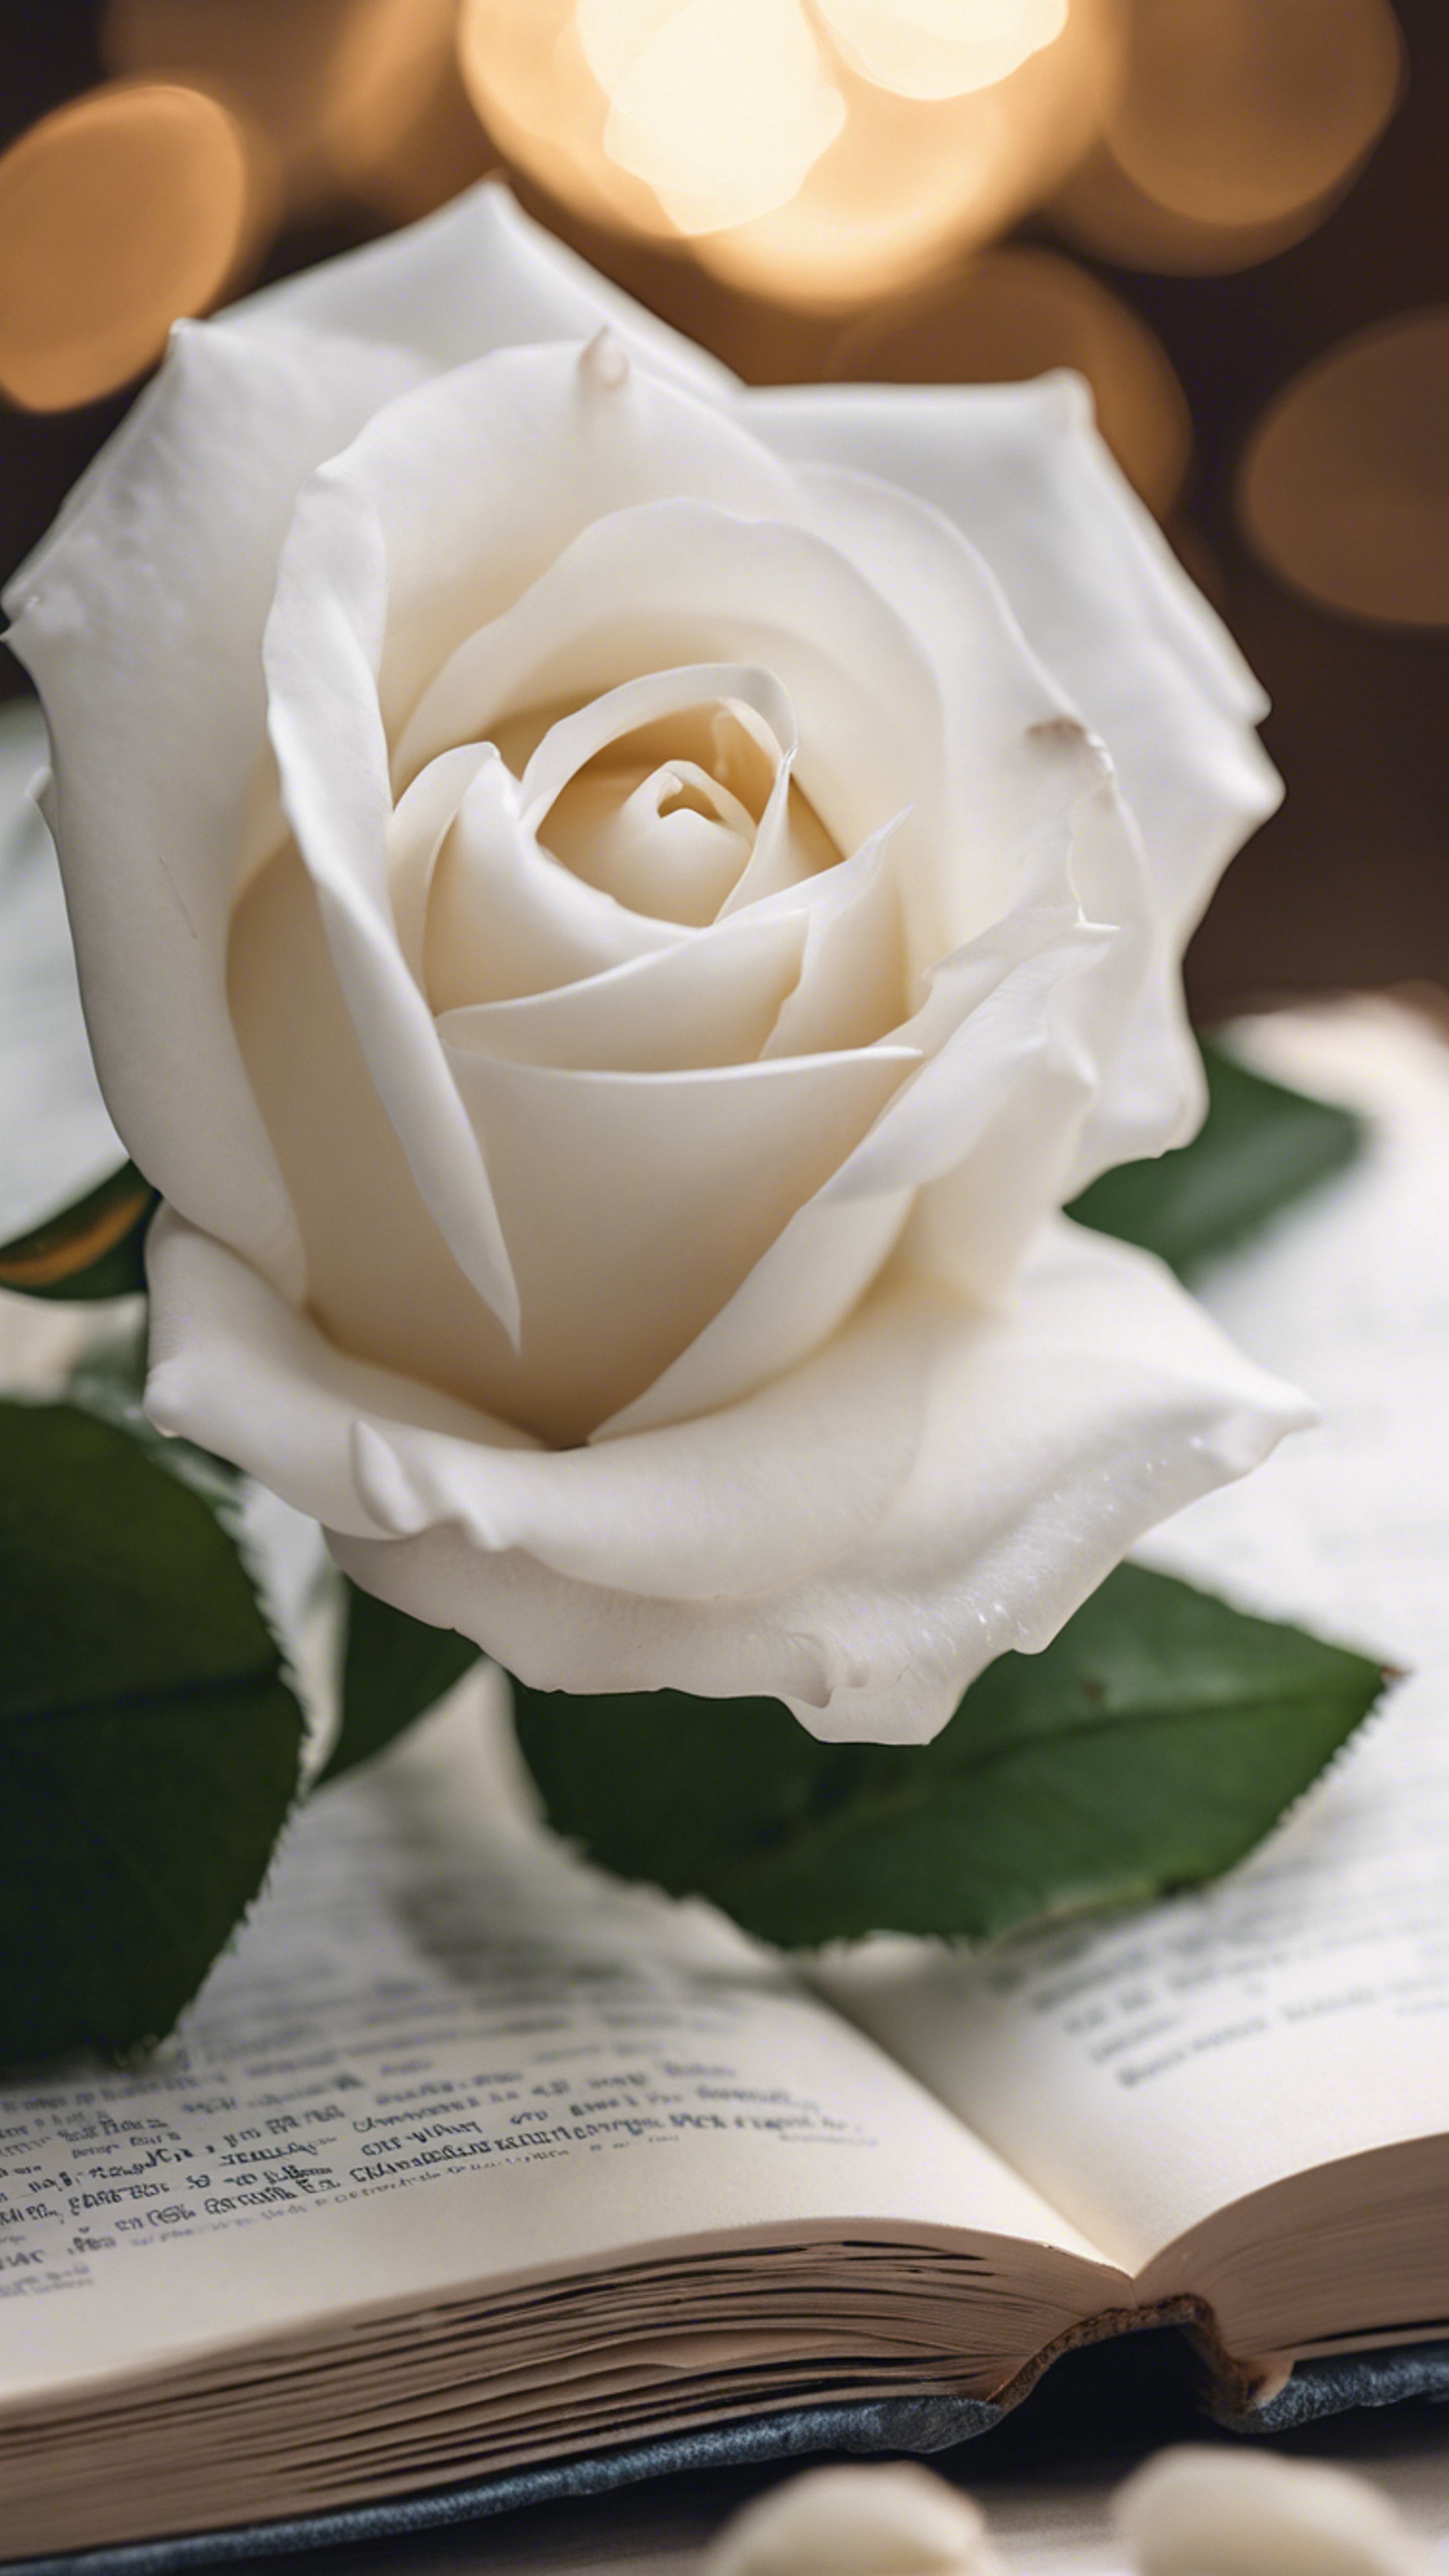 A serene white rose perched on an open hardcover book. Taustakuva[5eeaaa5d95634df1b3fb]